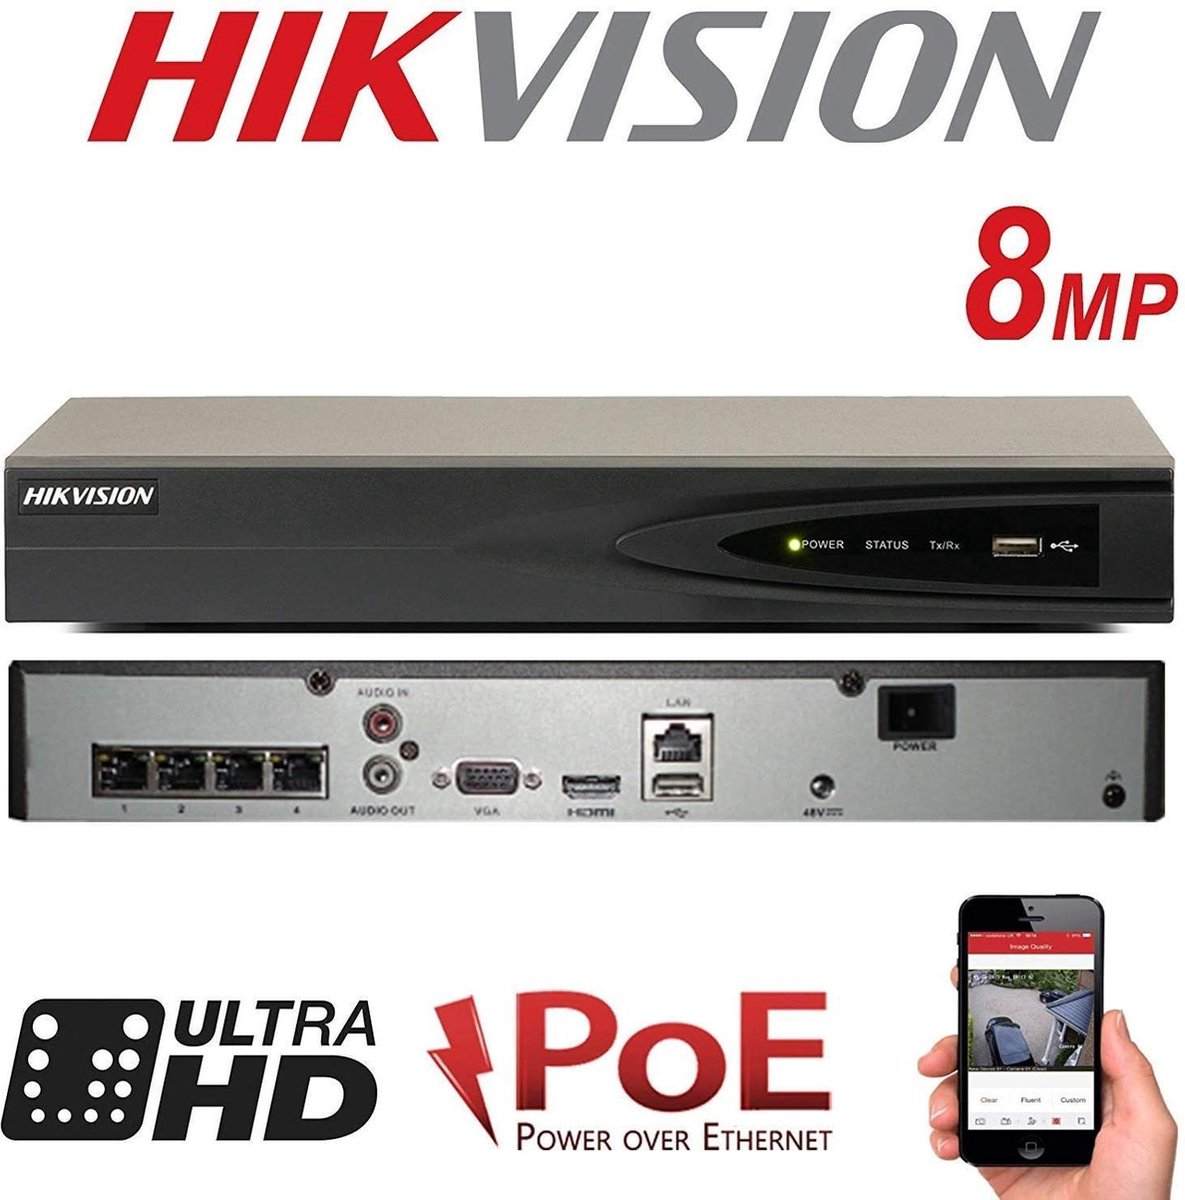 HIKVISION 4CH 8MP NVR IP Netwerk POE HDMI FULL HD 1080P 4K UHD Digitaal Bewakingscamera Recorder Systeem UP TO 6TB H.254 H.265 Home Office Werkplek PRO DS-7604NI-K1/4P (Geen HDD)